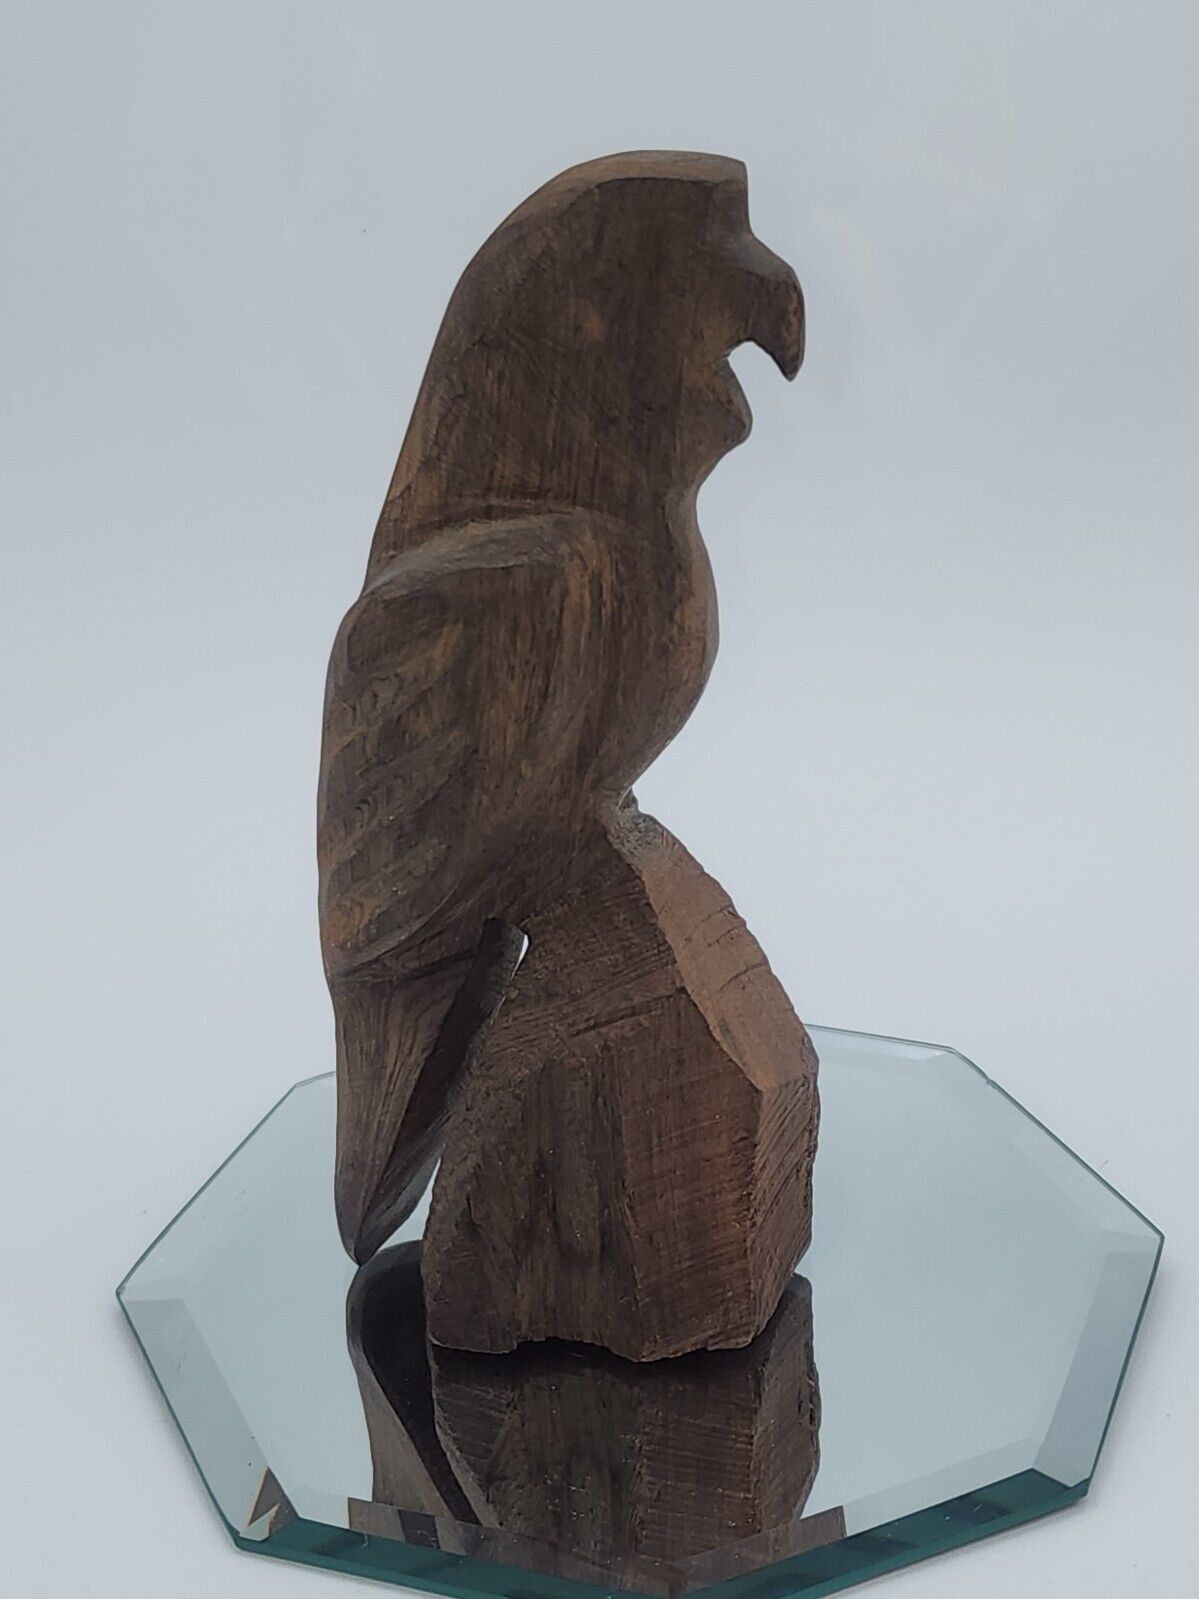 Hand Carved Wood Parrot 5.5 inches Tall Has Artists Mark